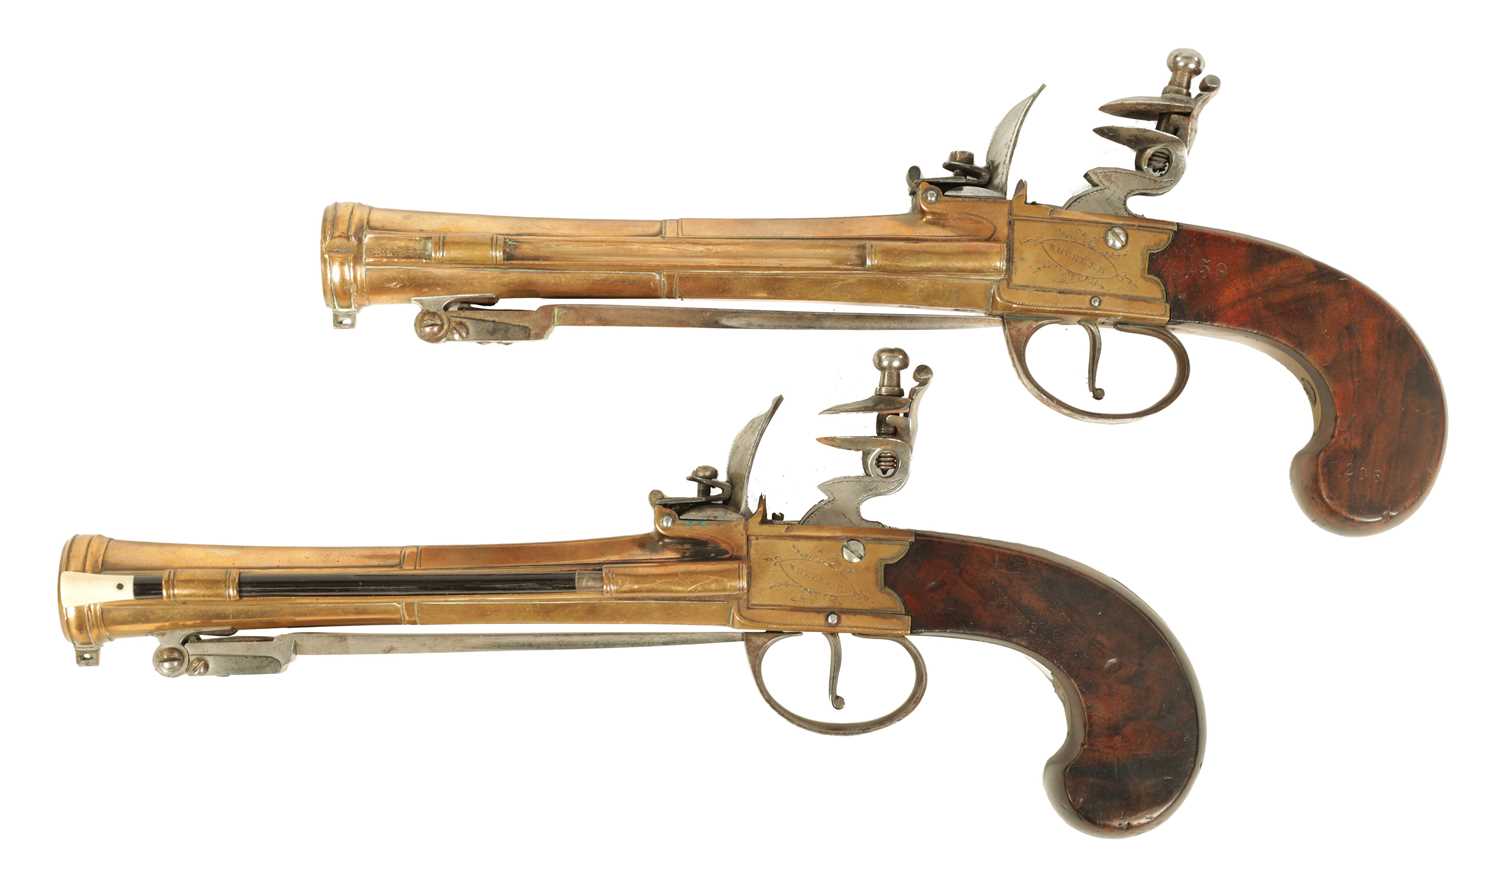 Lot 681 - WHEELER. A GOOD PAIR OF EARLY 19TH CENTURY BRONZE FRAMED BOXLOCK  BLUNDERBUSS PISTOLS WITH UNDER FLICK BAYONETS